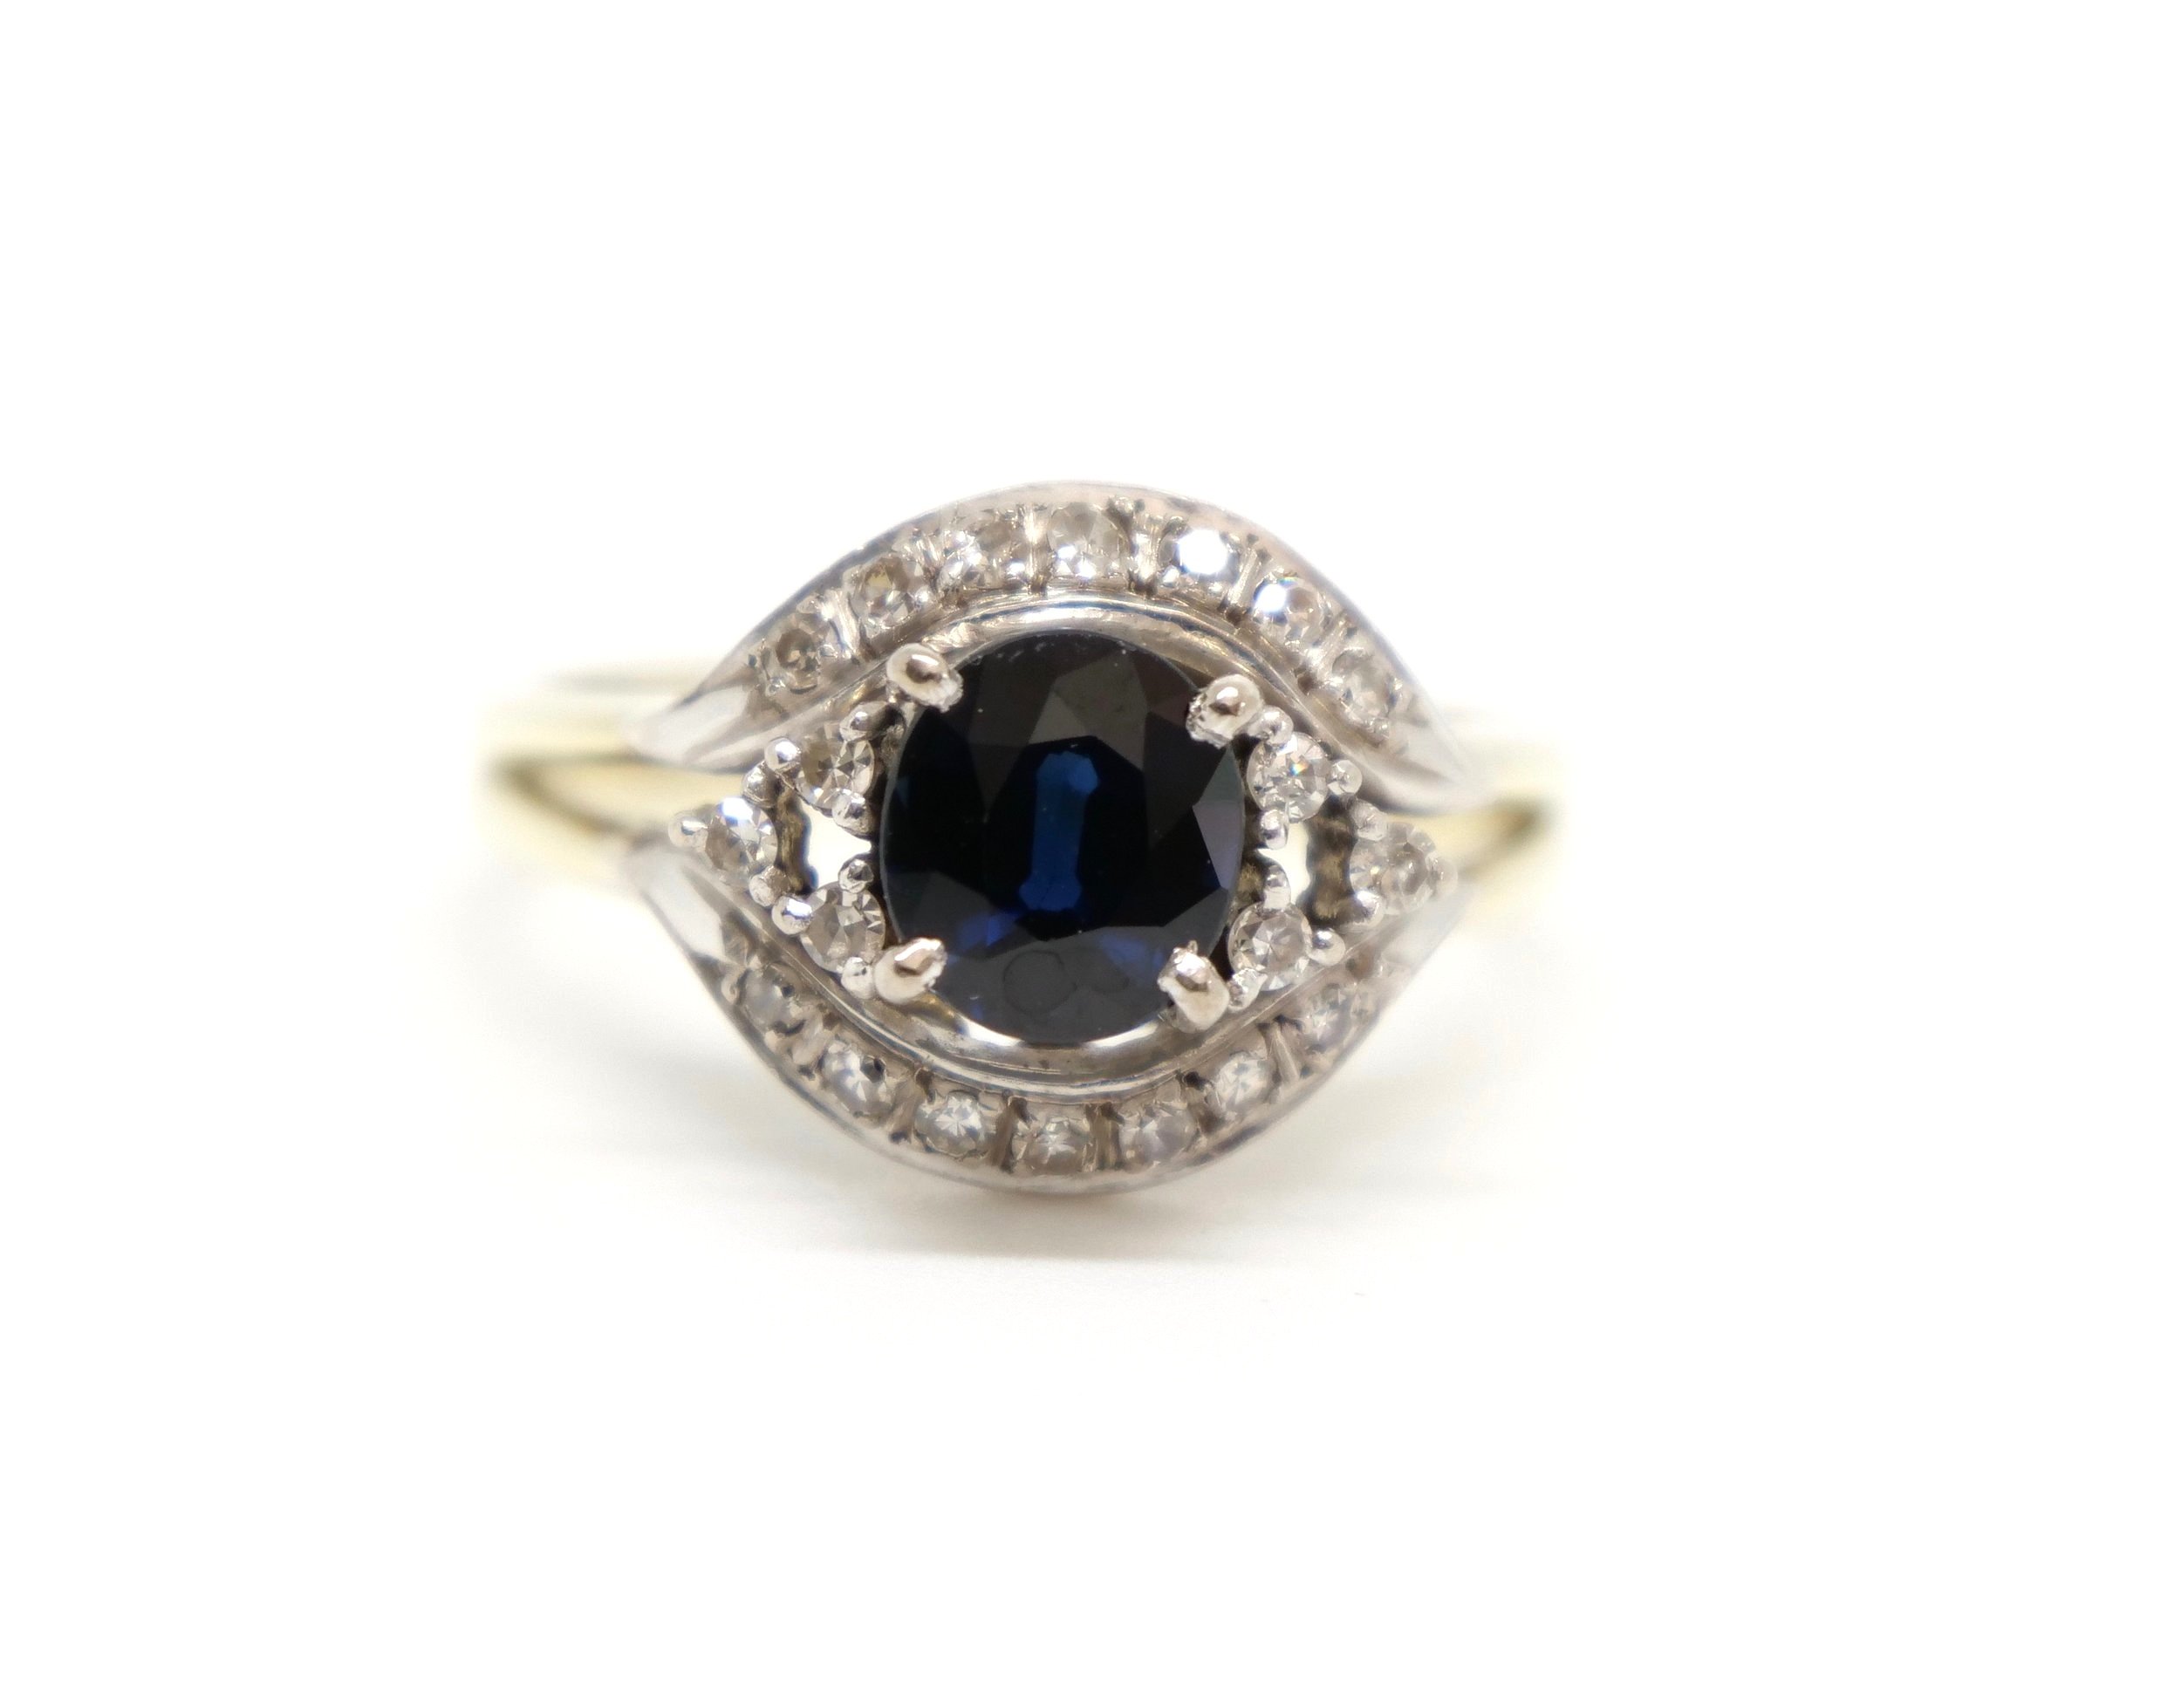 Large Two Stone Diamond Crossover Ring for Sale